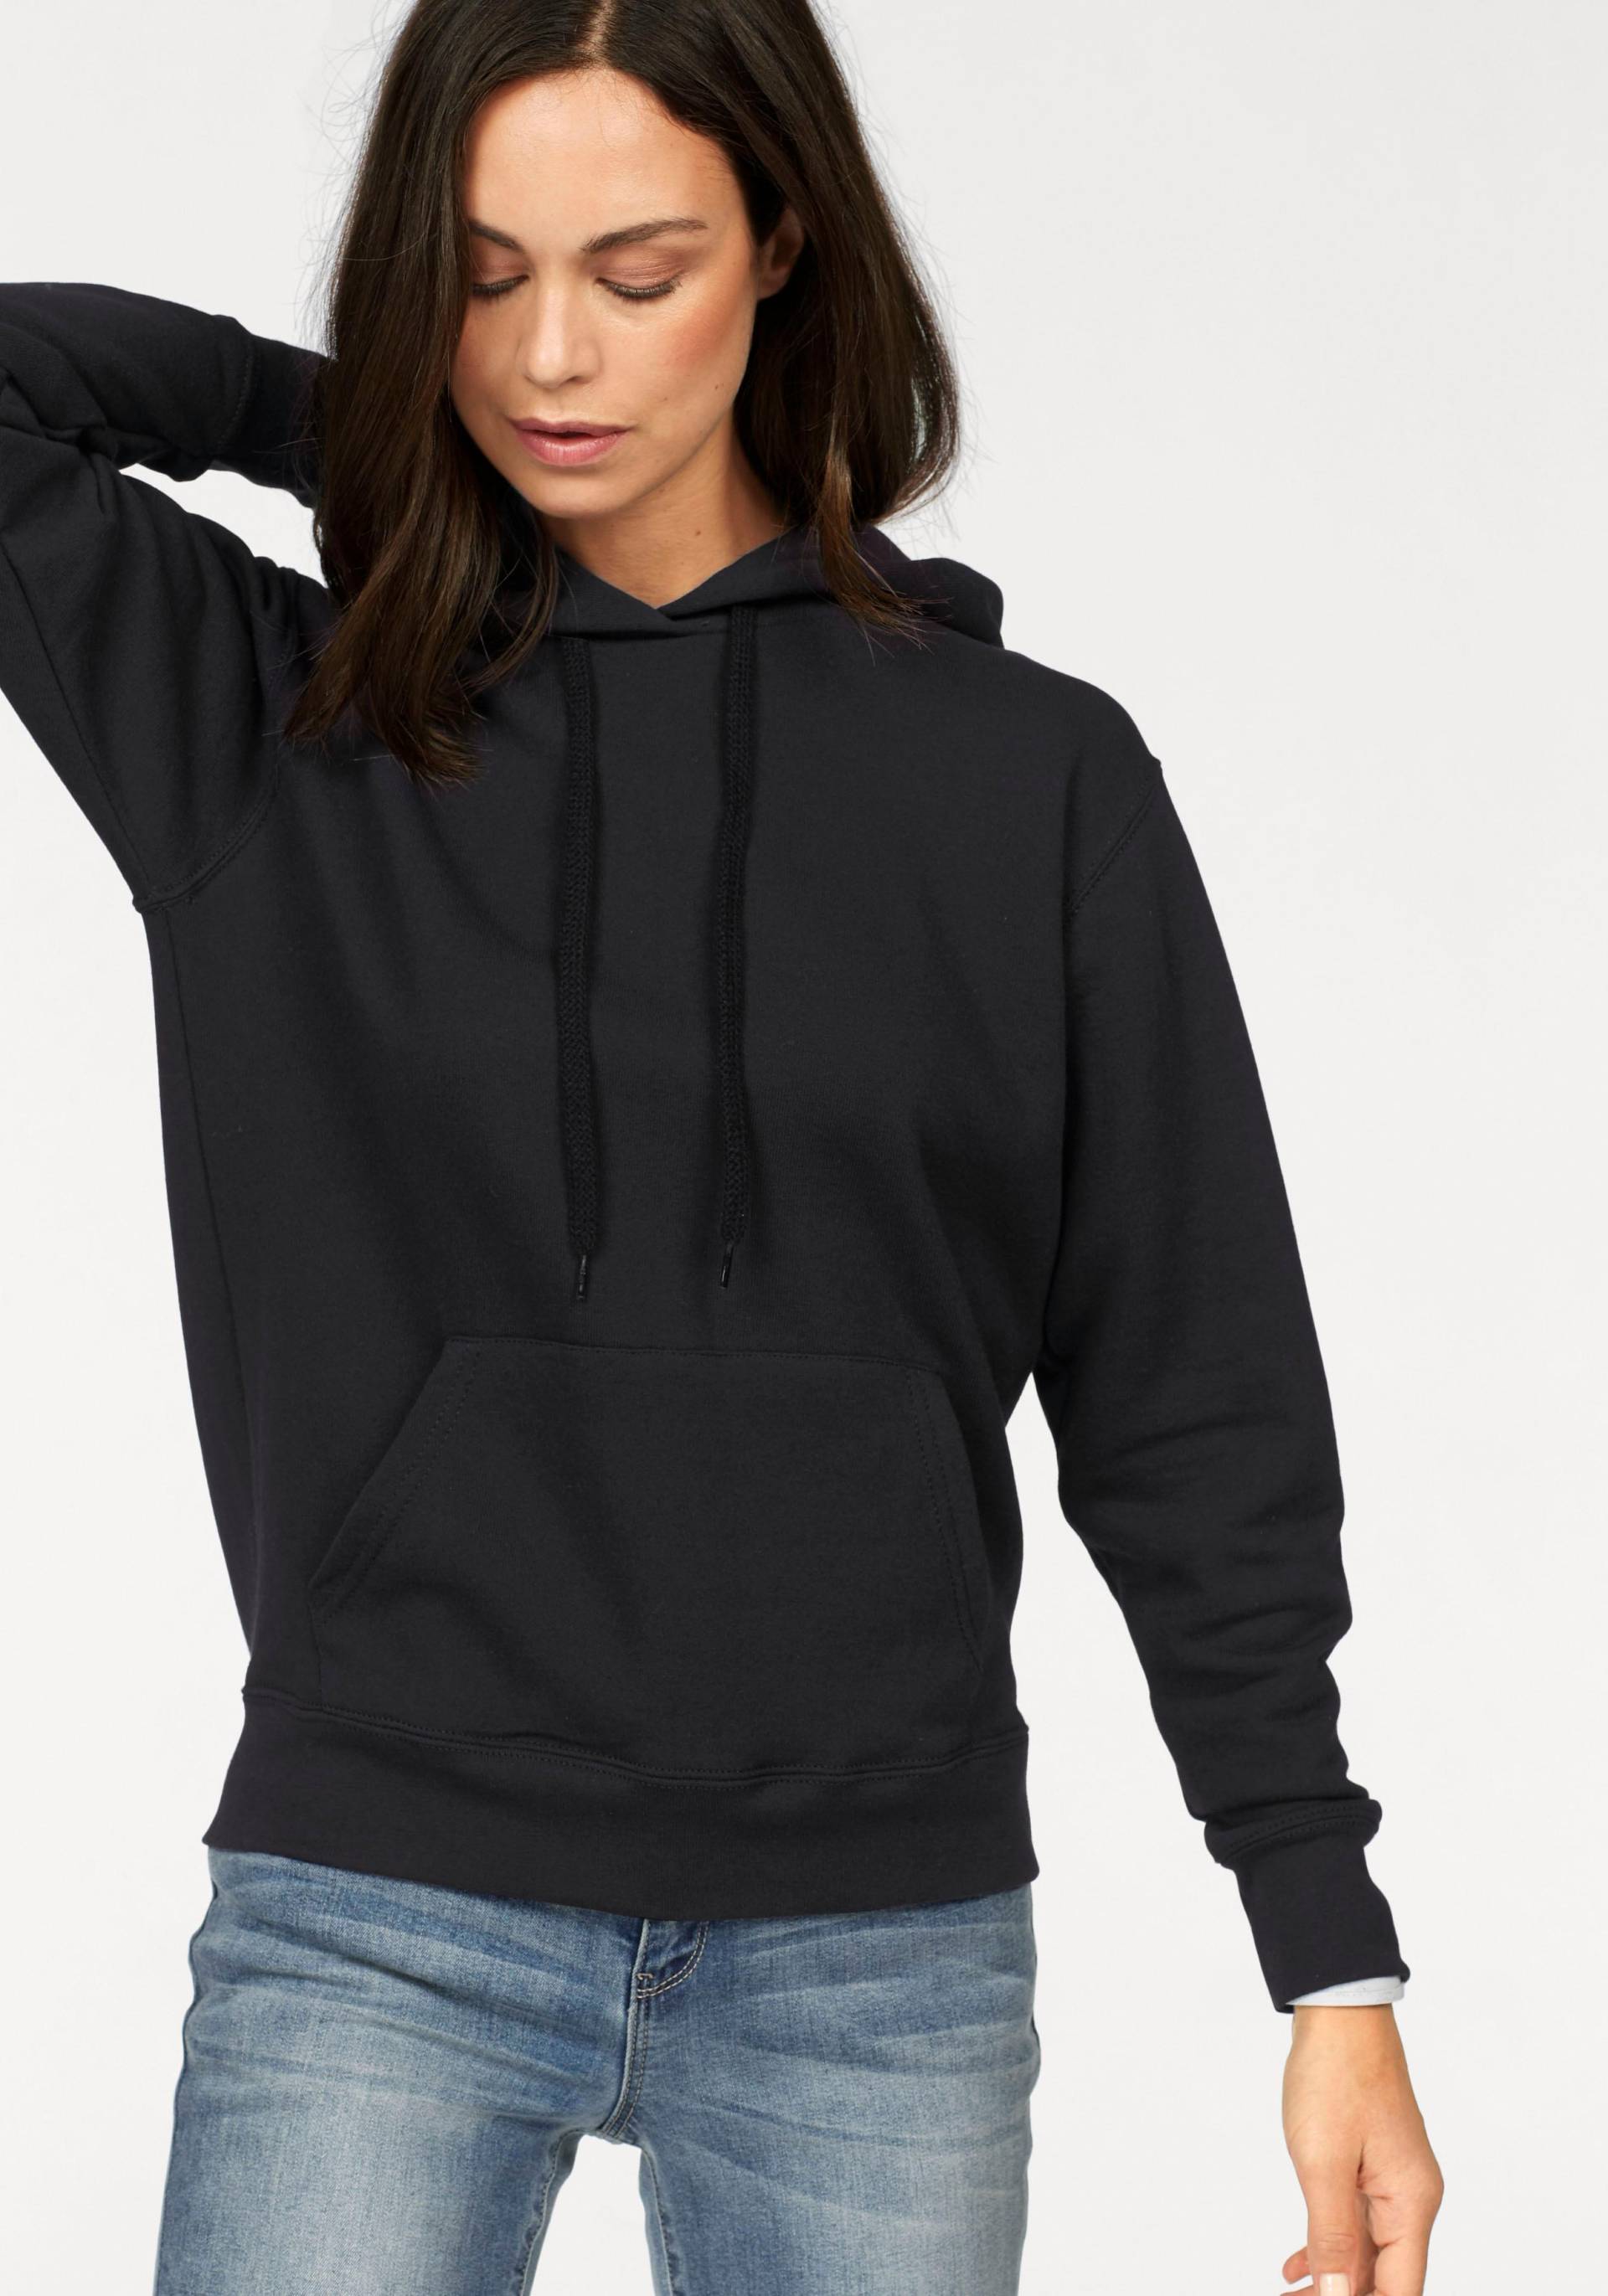 Fruit of the Loom Sweatshirt »Classic hooded Sweat Lady-Fit« von Fruit of the Loom